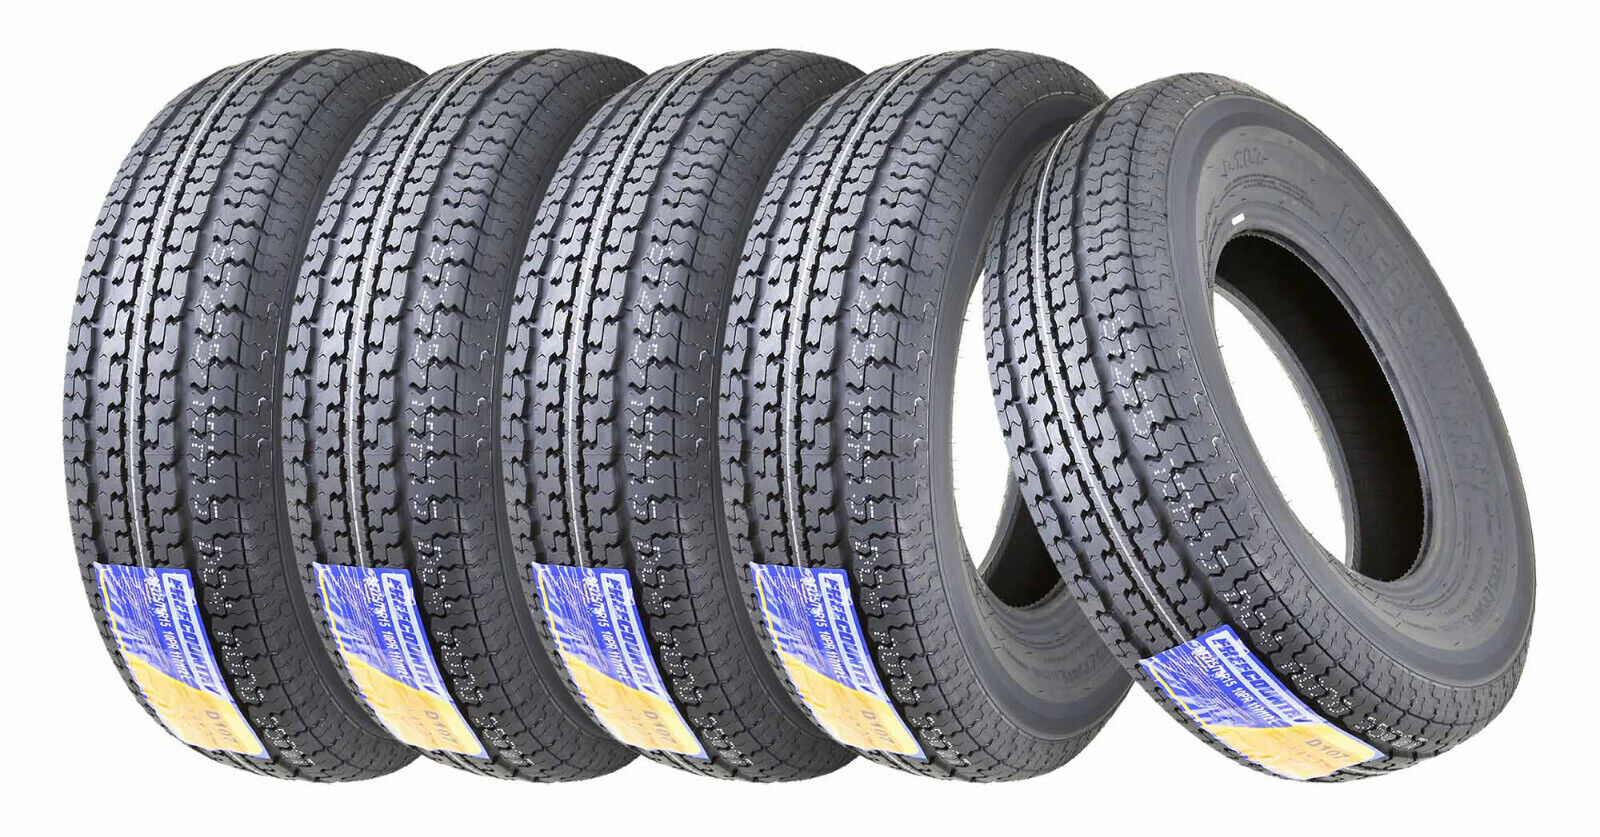 5 ST225/75R15 Trailer Tires 225 75 15 Free Country Radial 10PR LRE w/Scuff Guard